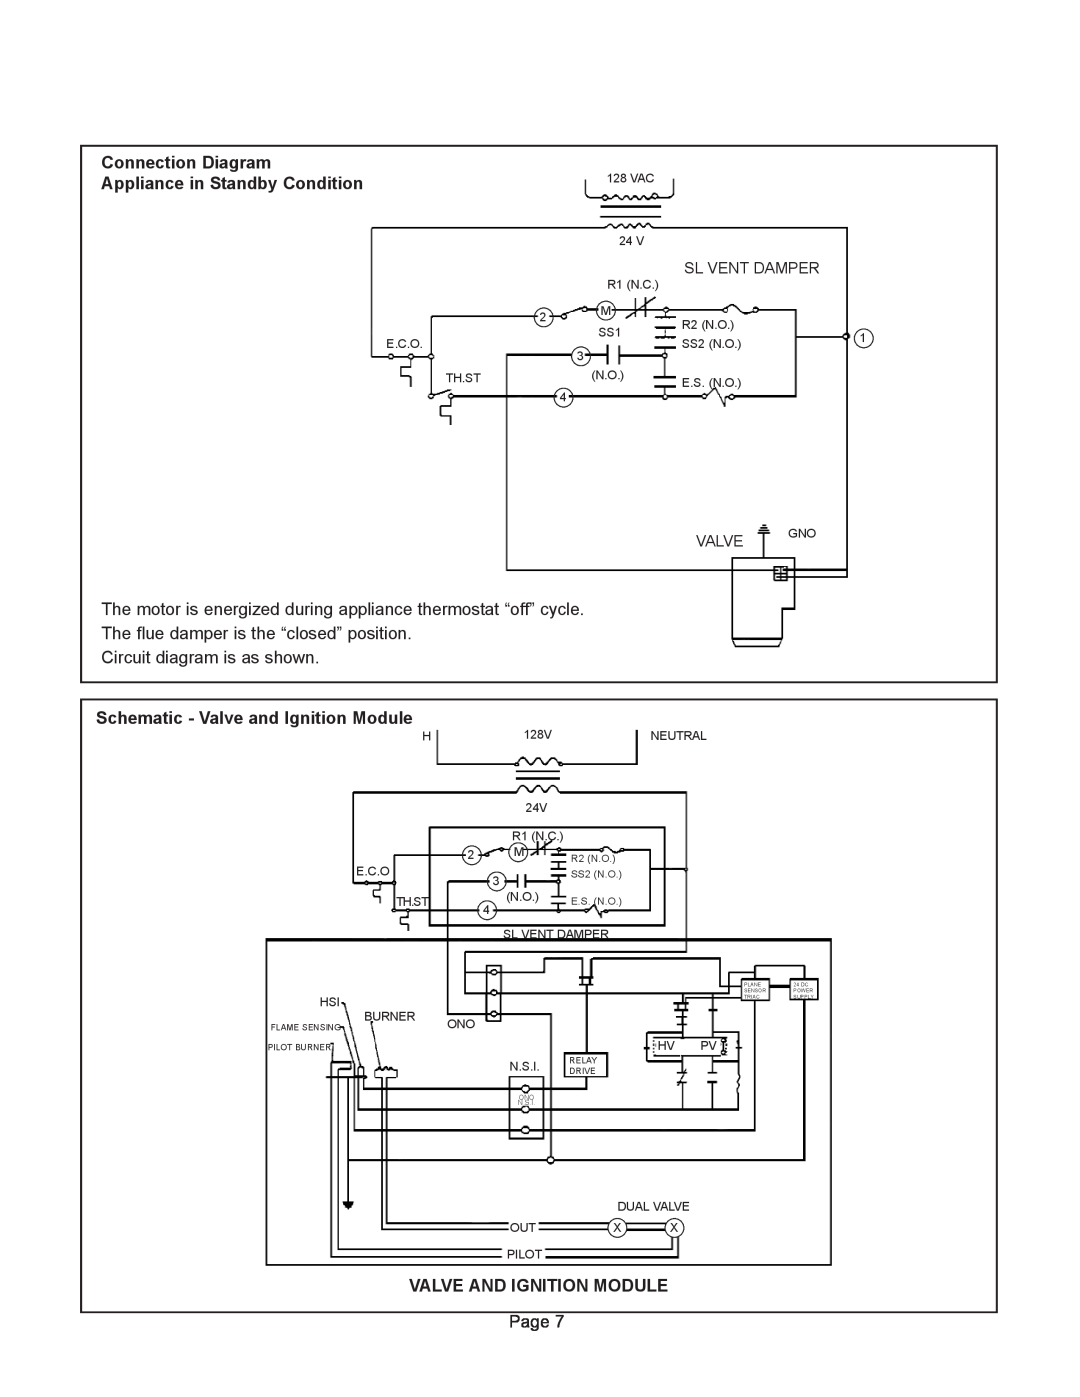 GSW G65 Connection Diagram, Appliance in Standby Condition, The flue damper is the “closed” position, Page 